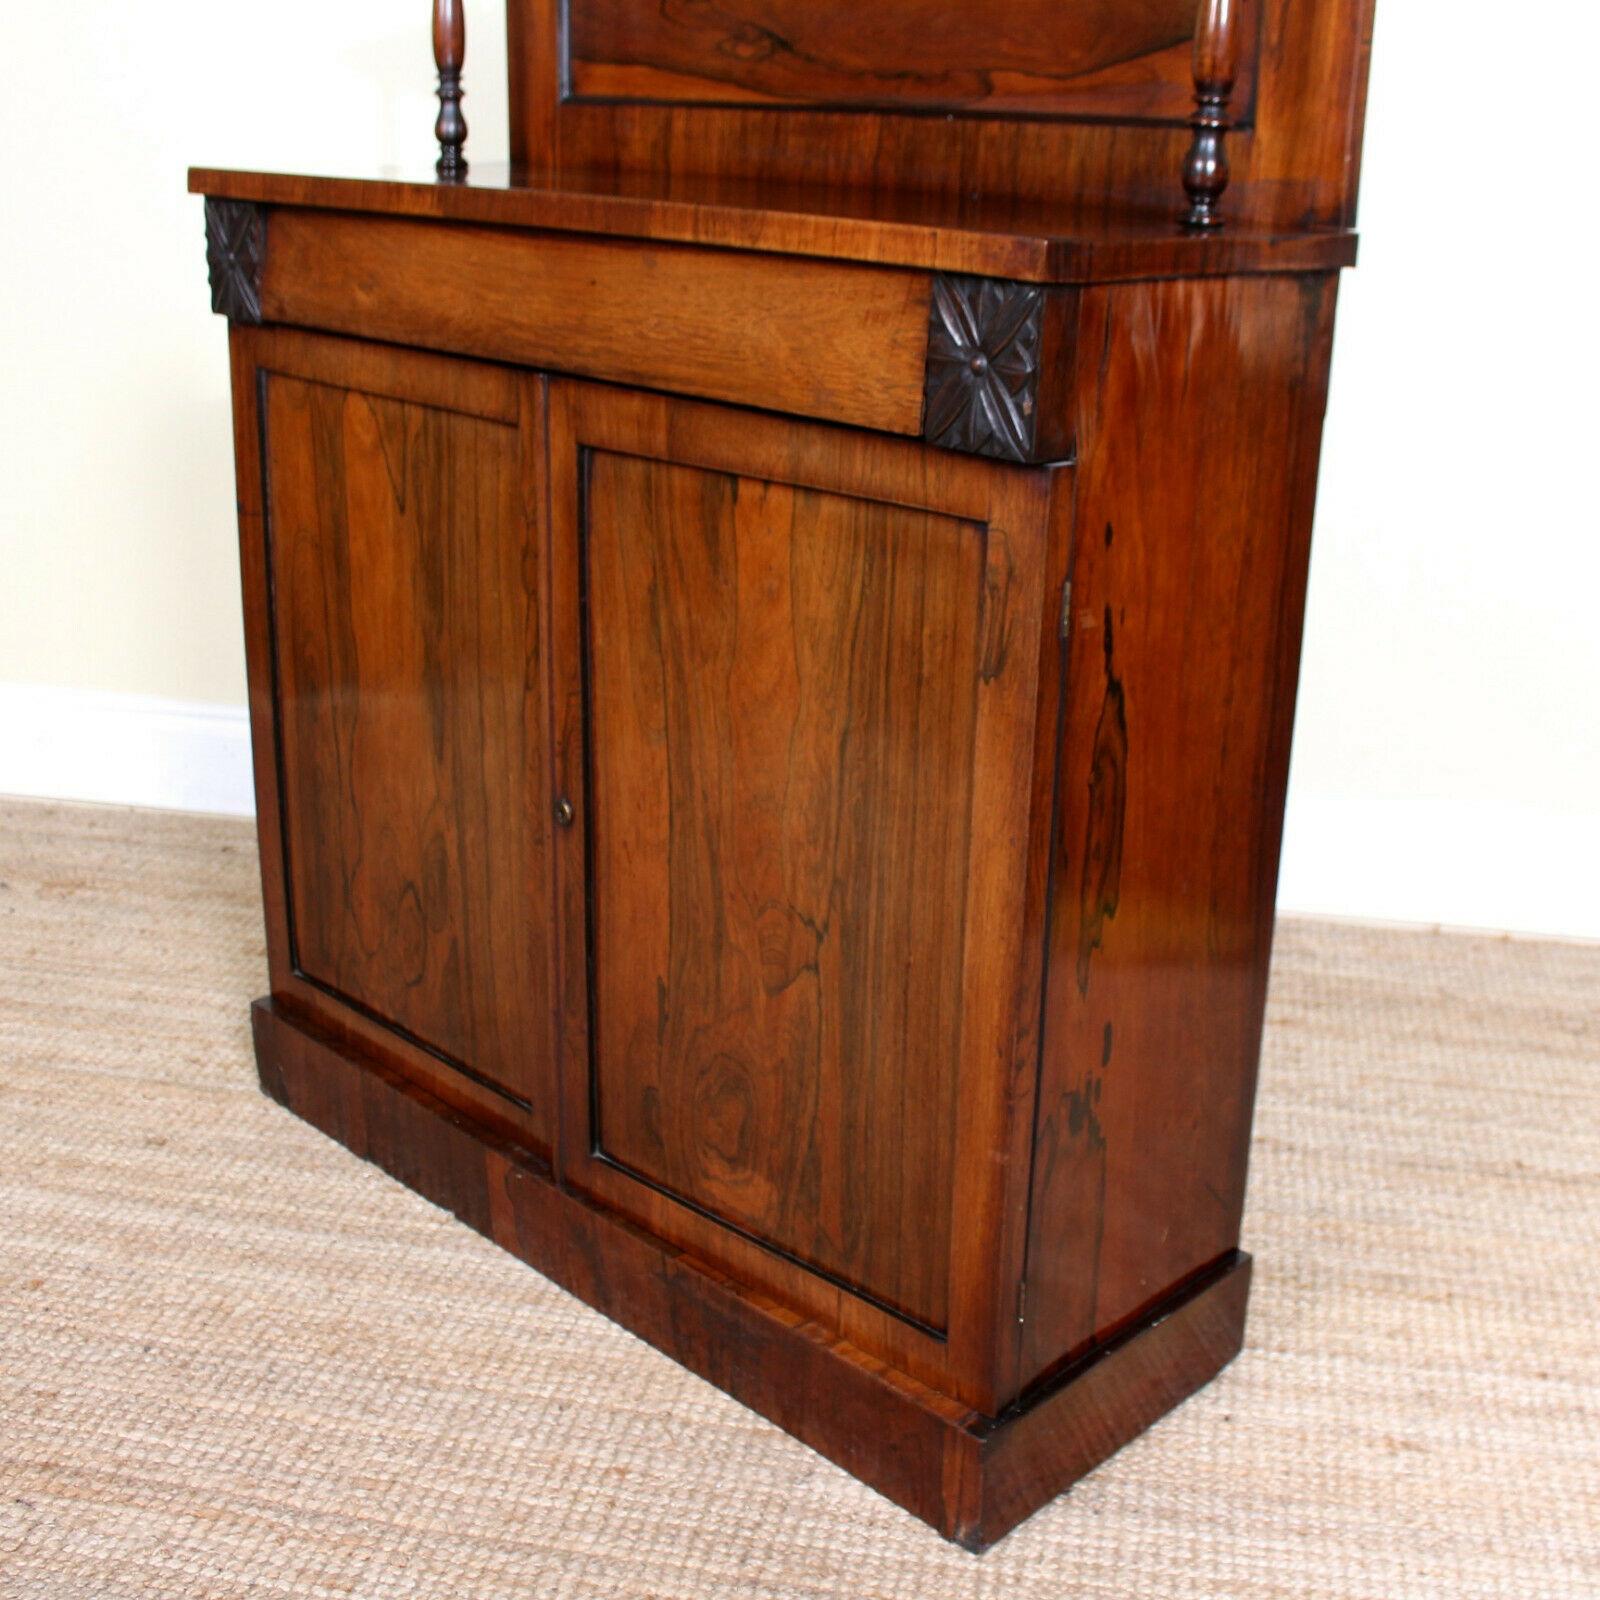 English Rosewood Chiffonier Petite Sideboard Victorian, 19th Century For Sale 2